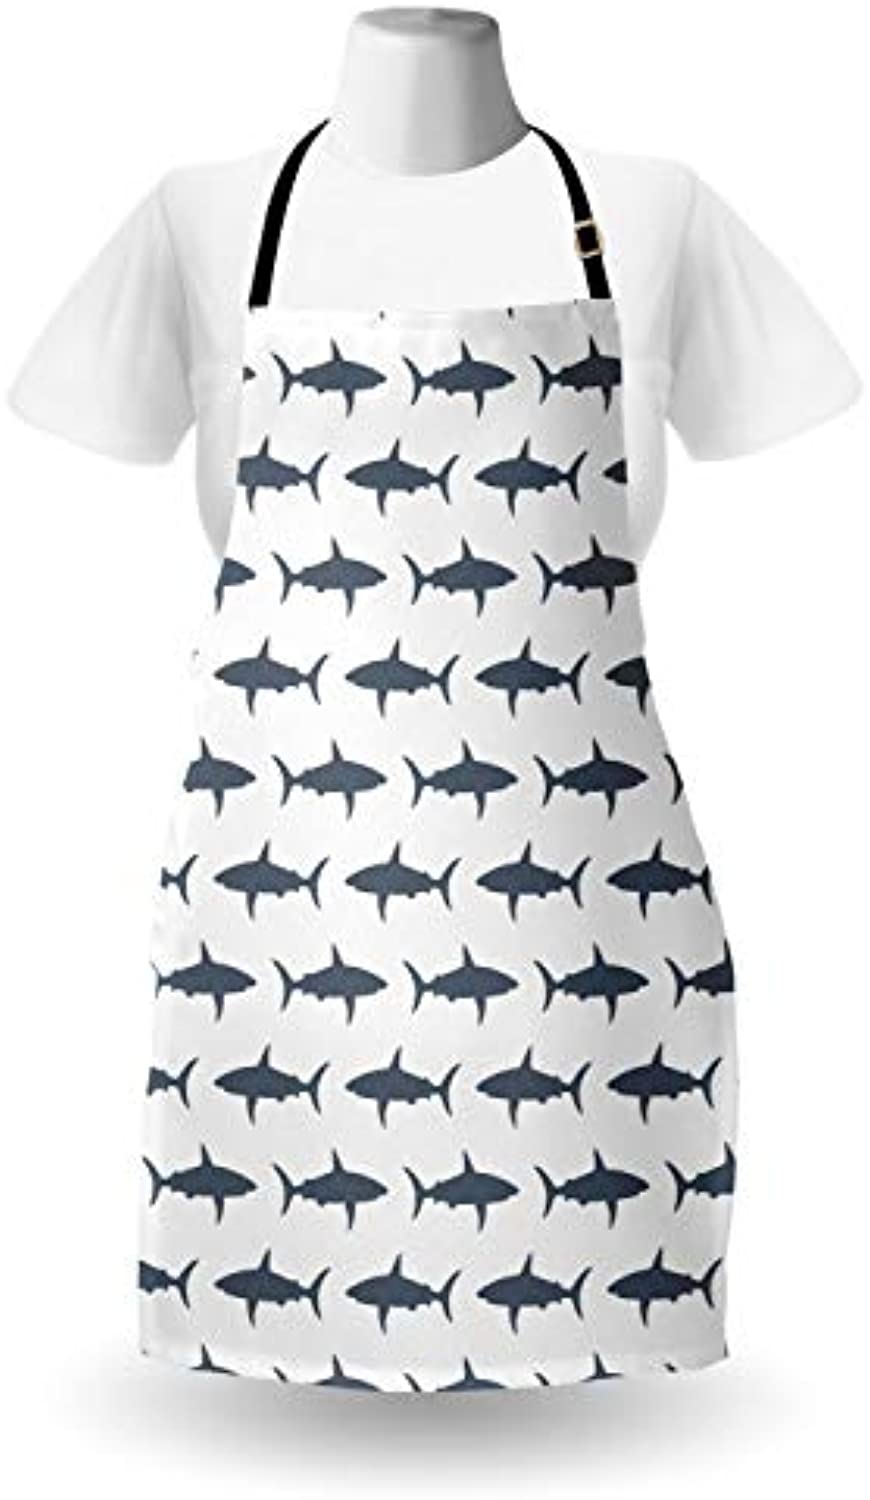 Granbey Sea Animals Apron  Sharks Swimming Horizontal Silhouettes Powerful Dangerous Wild Life  Unisex Kitchen Bib with Adjustable Neck for Cooking Gardening  Adult Size  Charcoal Grey